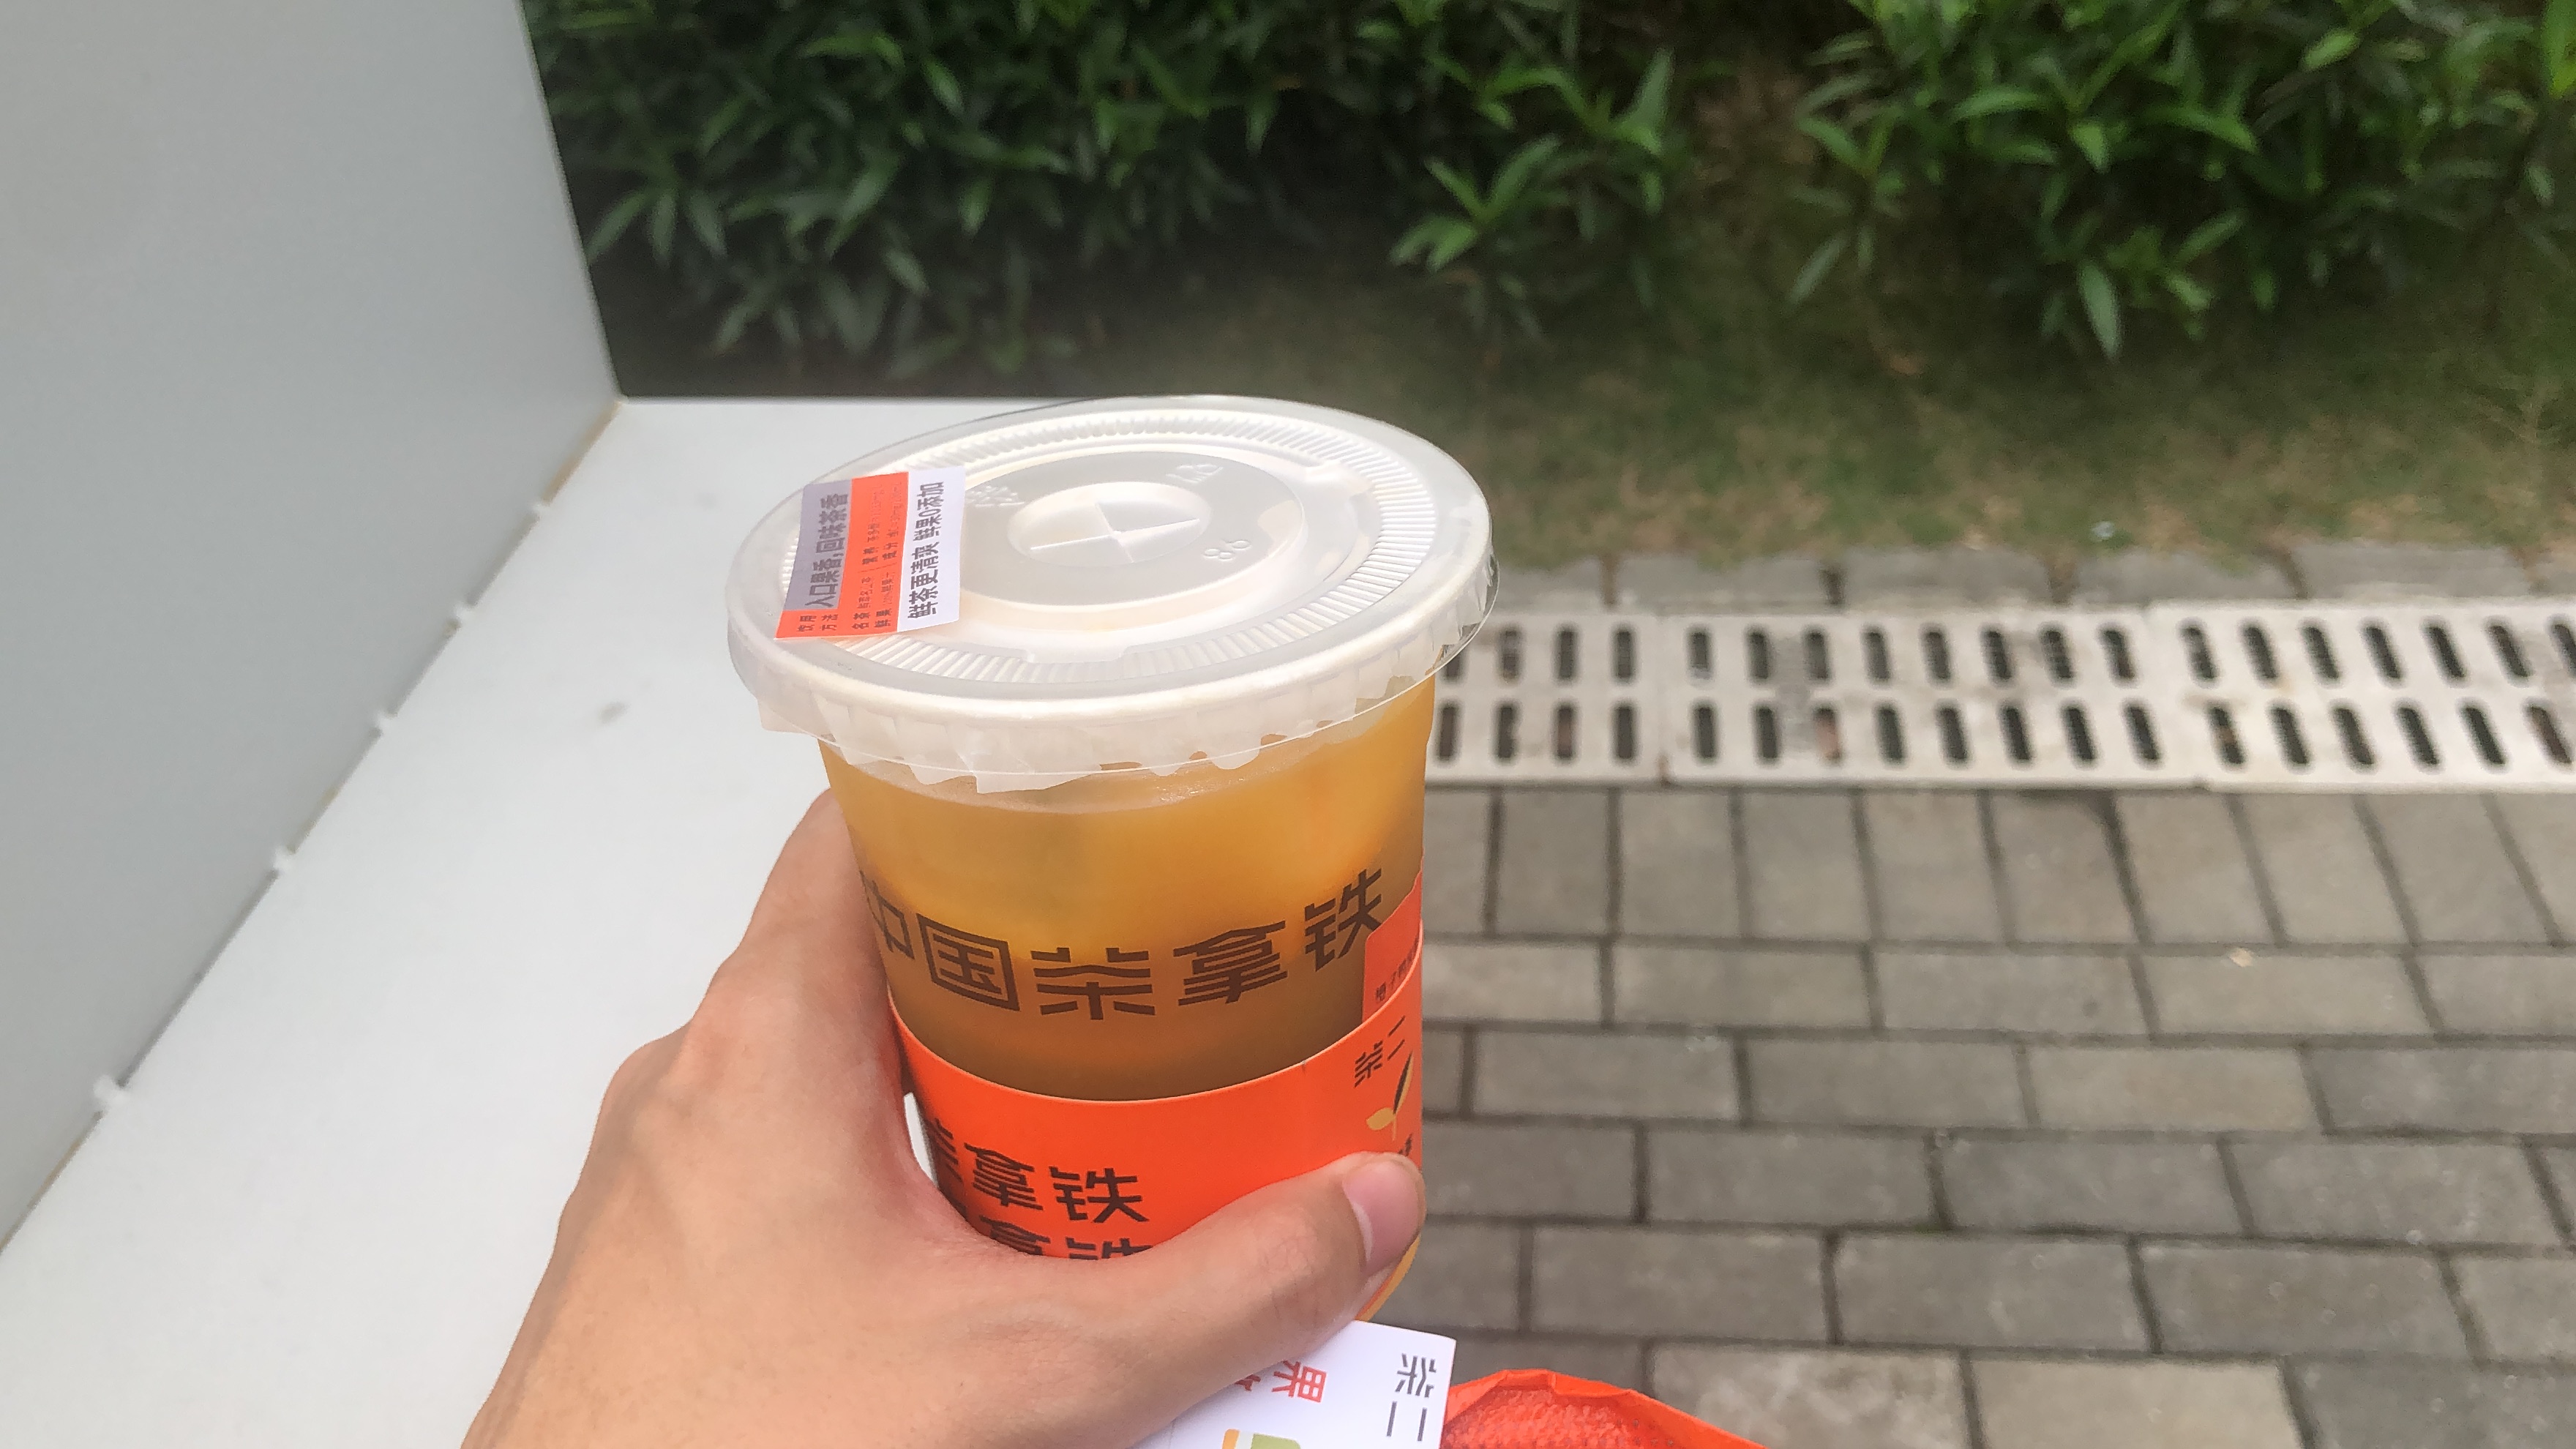 A hand holding a cup of iced tea.